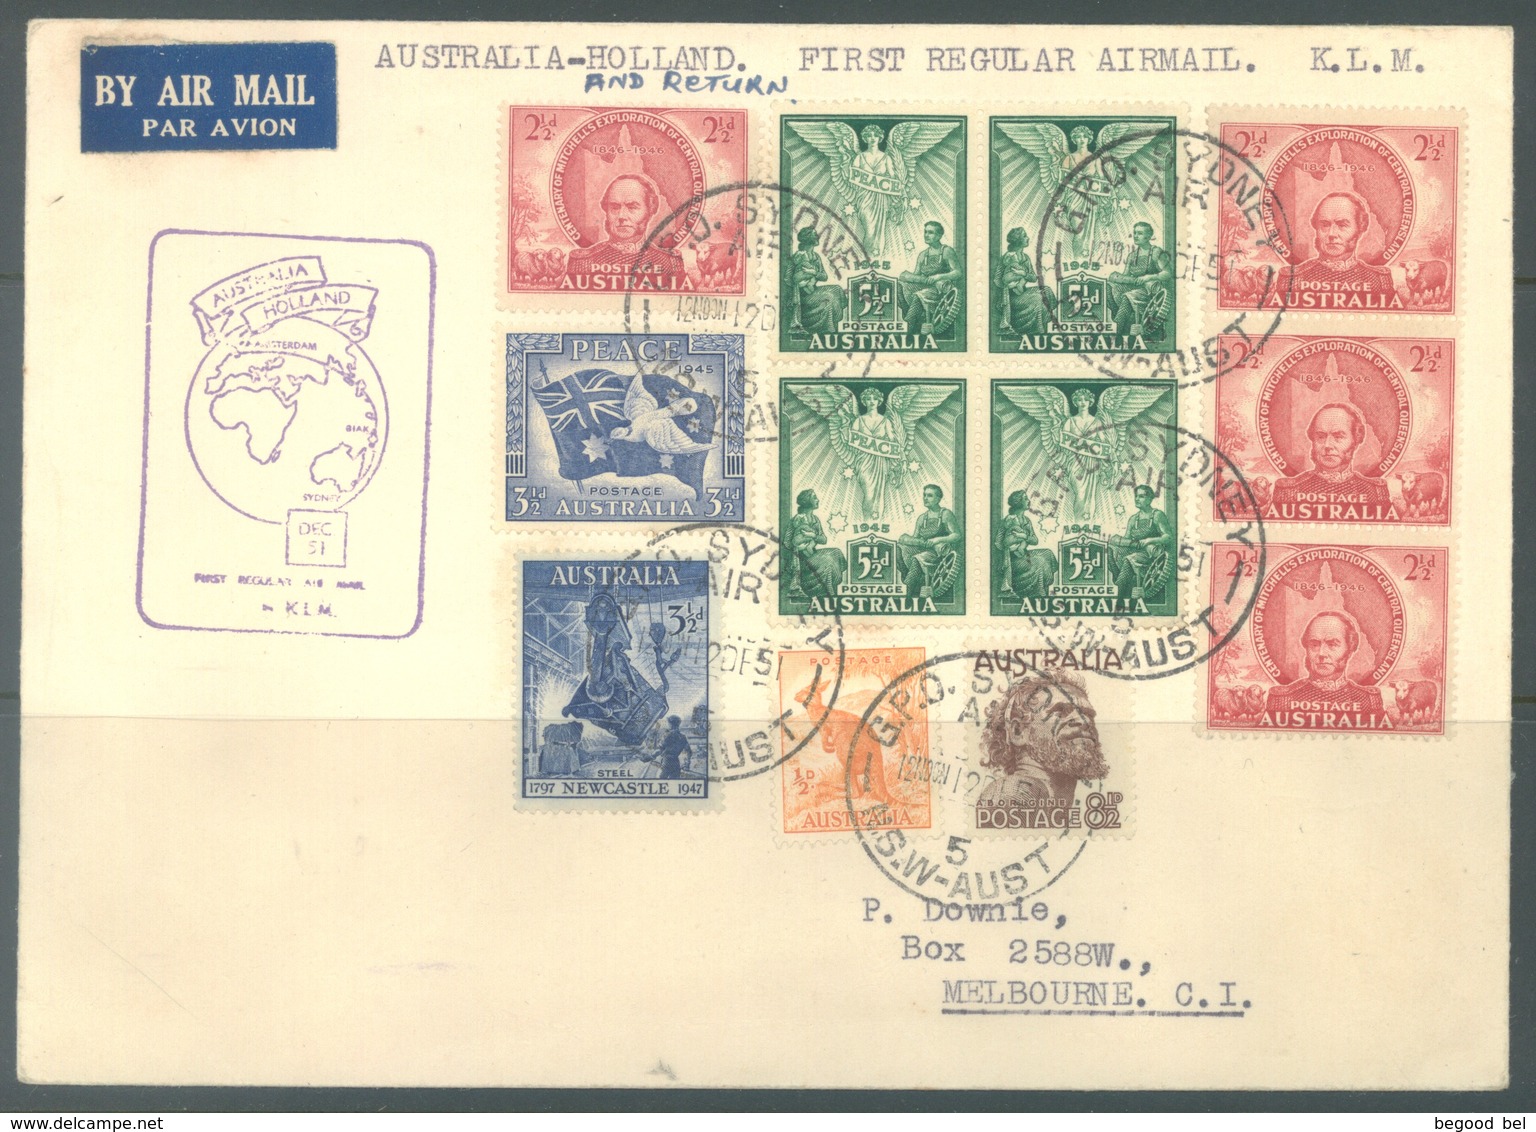 AUSTRALIA - DEC 1951 - FDC - FIRST DAY OF ISSUE AUSTRALIA HOLLAND AND RETURN KLM - Lot 17395 - Premiers Vols